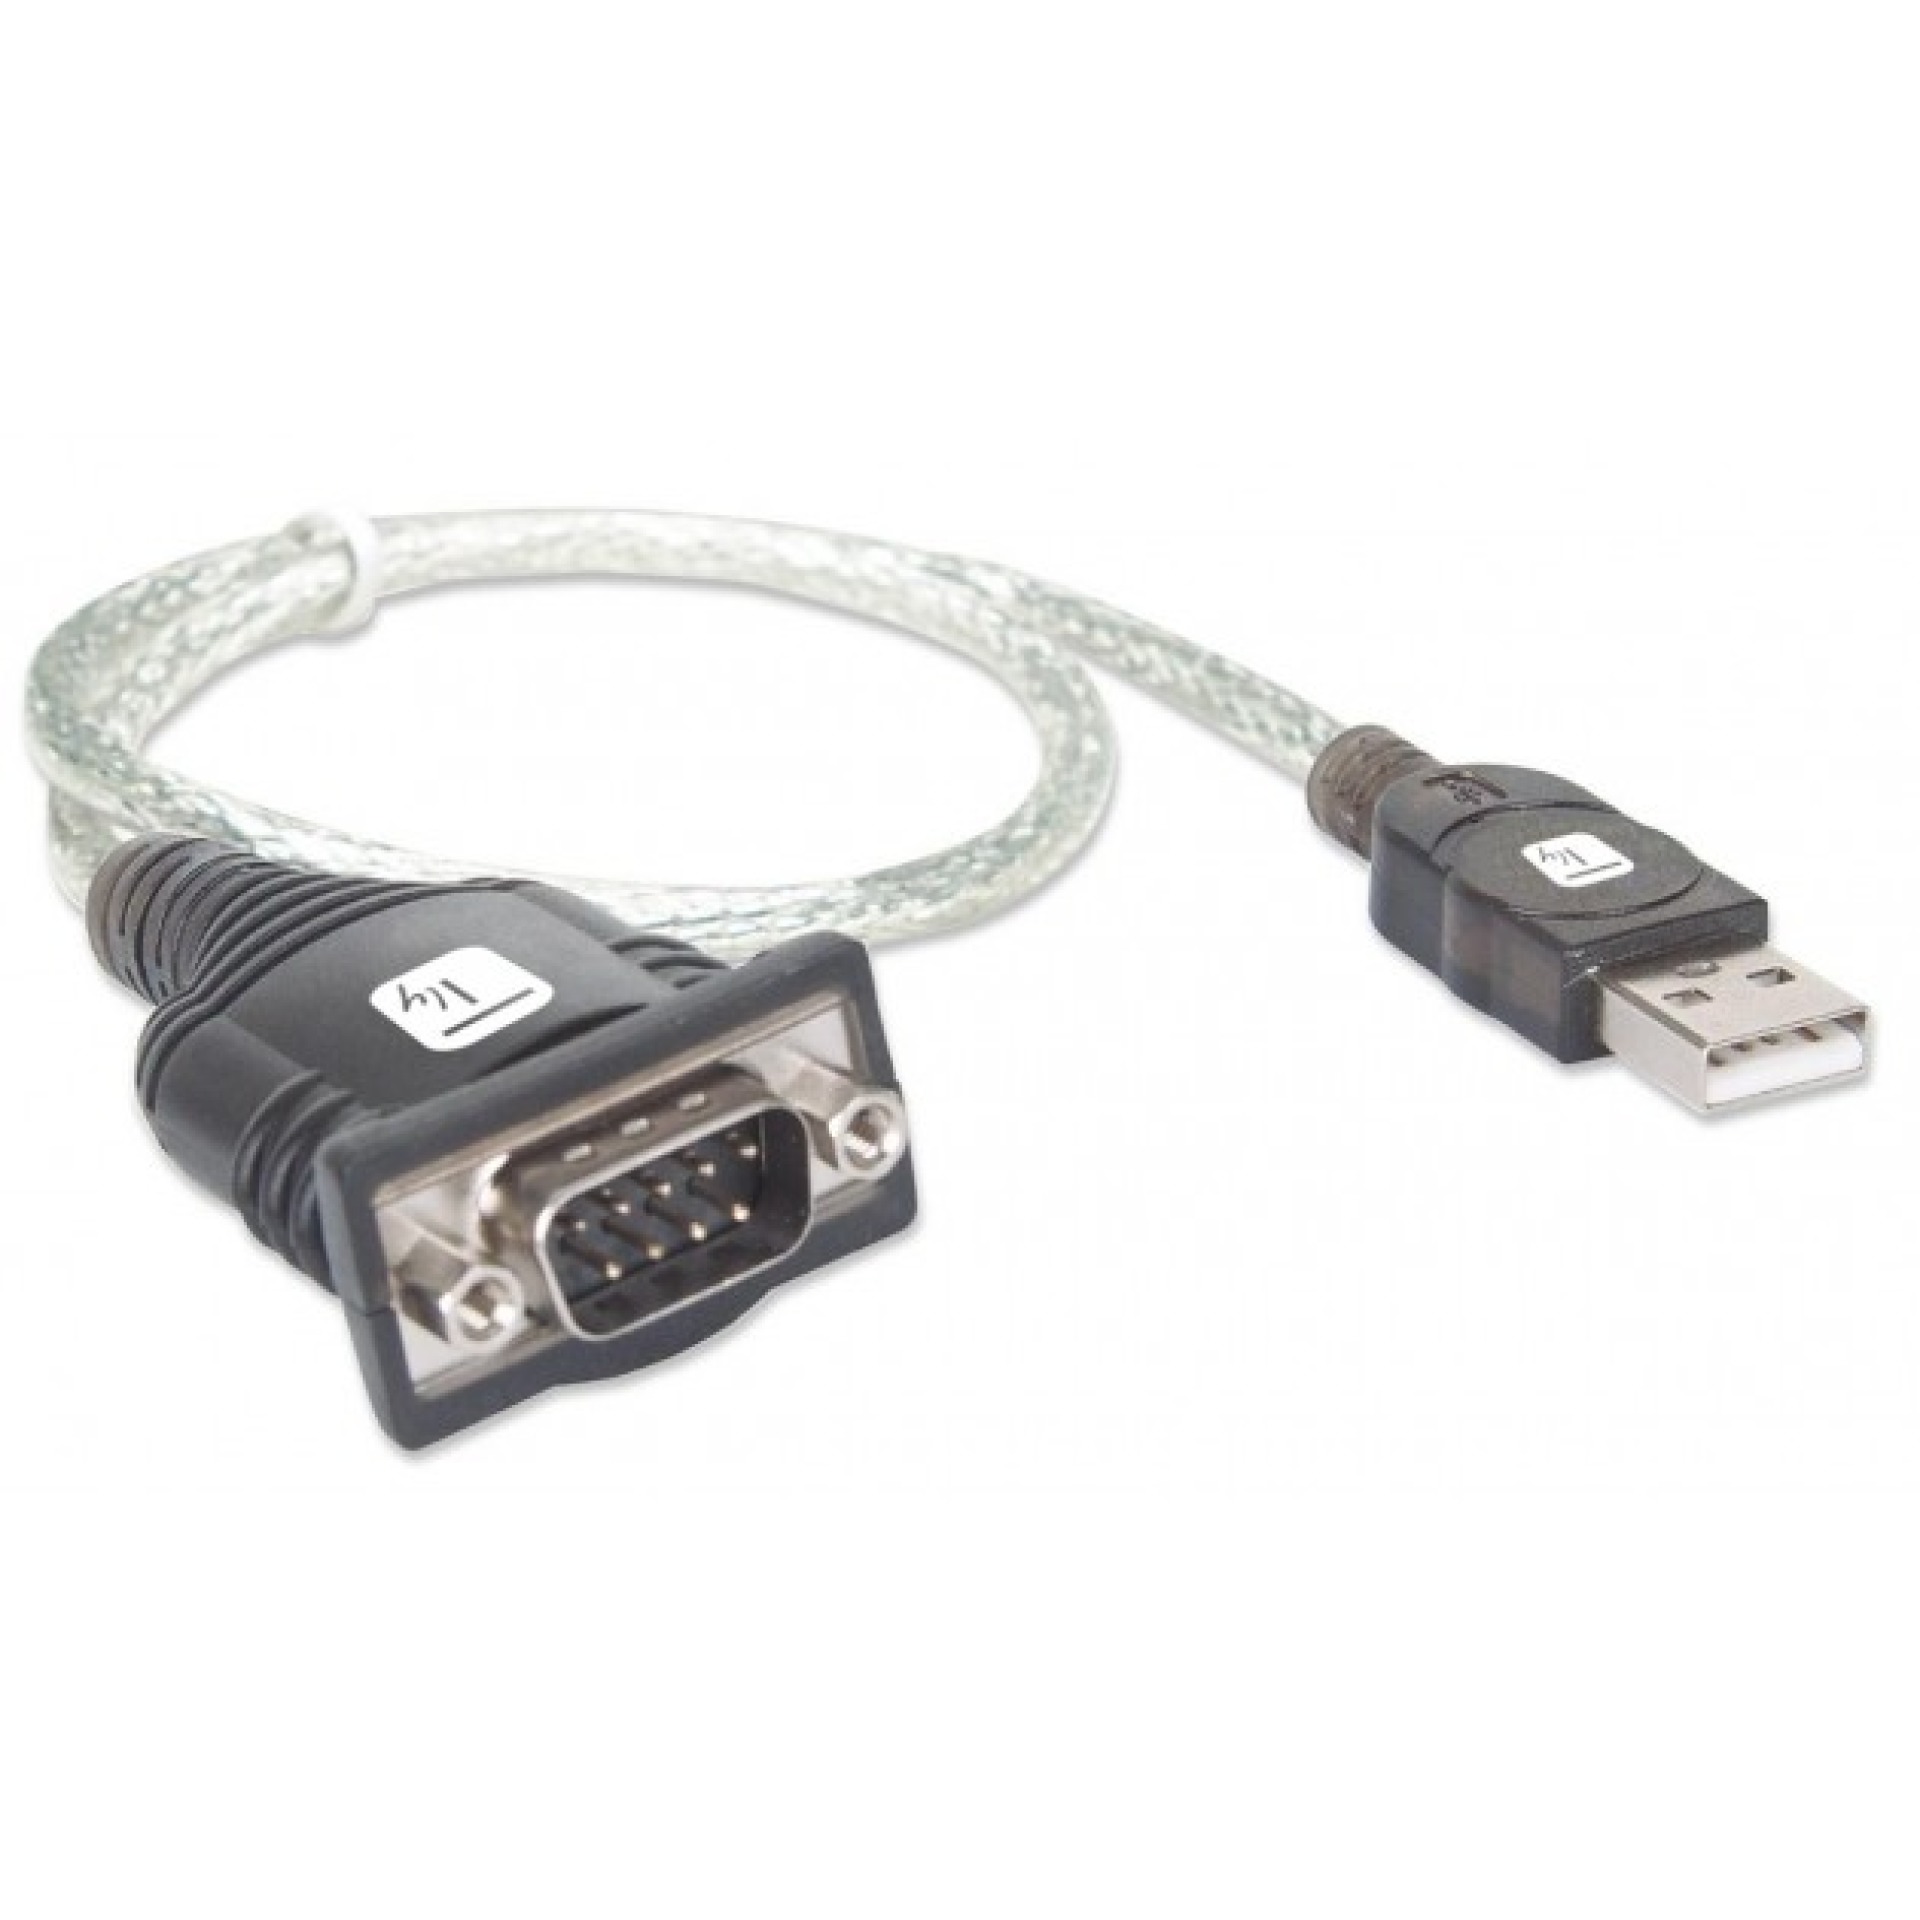 USB to Serial Techly Adapter Converter,USB AM auf RS232 port, 9-pin male